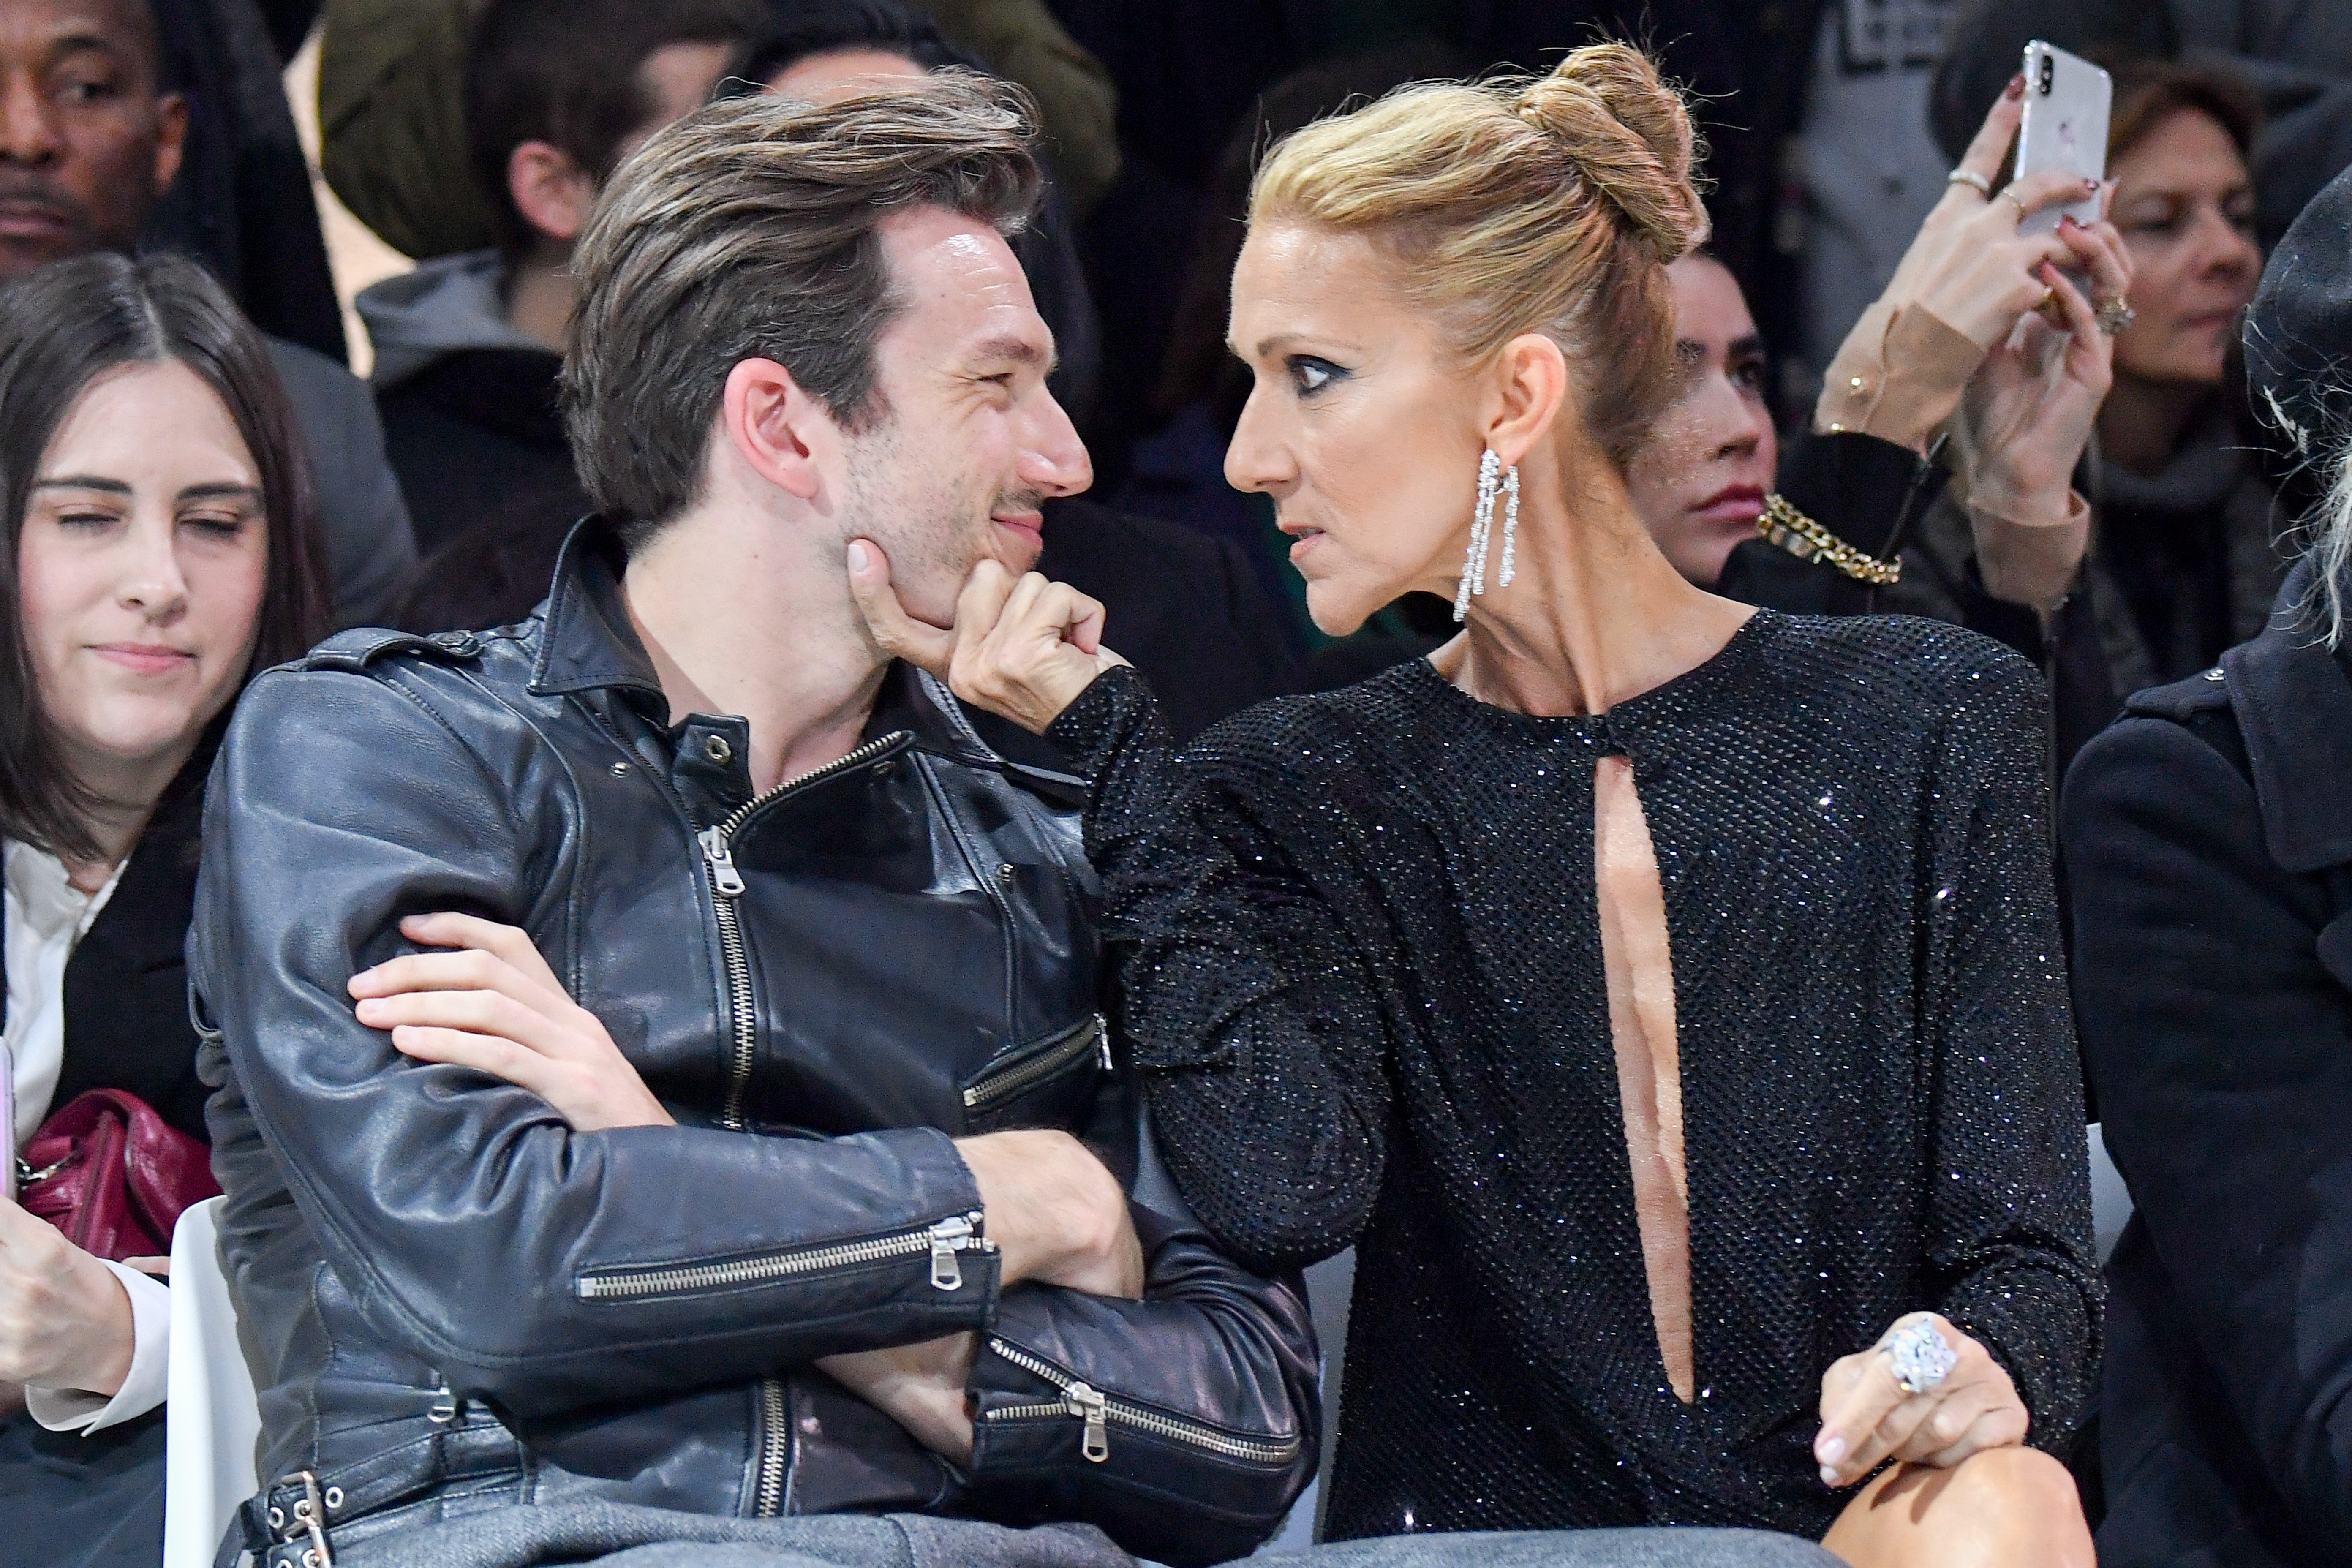 Pepe Munoz and Celine Dion attend the Alexandre Vauthier Haute Couture Spring Summer 2019 show as part of Paris Fashion Week on January 22, 2019 in Paris, France. | Source: Getty Images